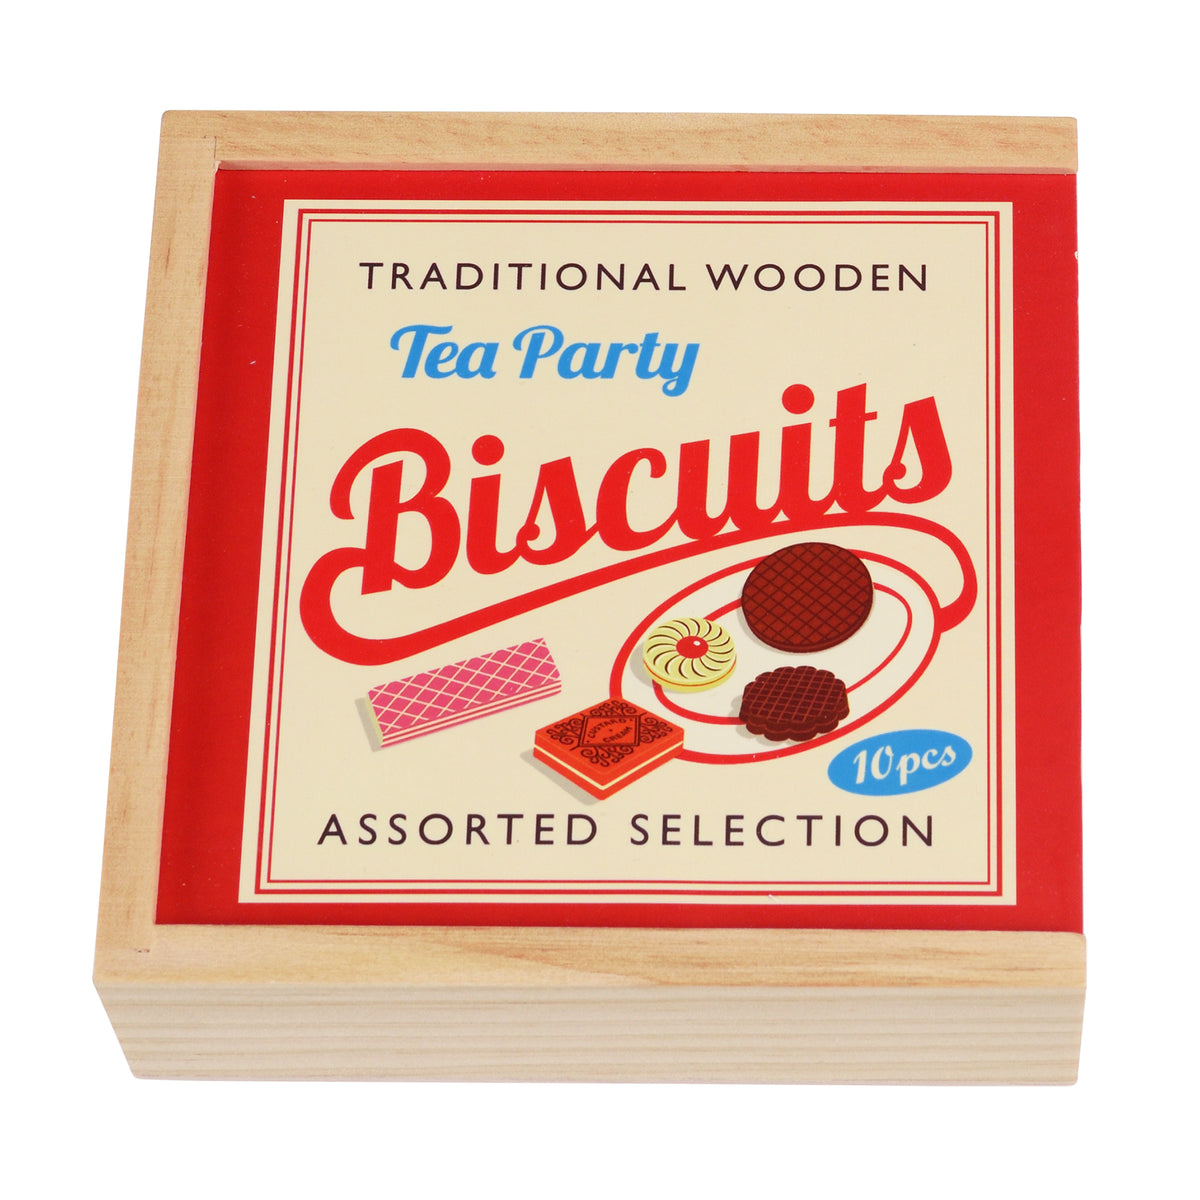 Traditional Wooden Tea Party Biscuits